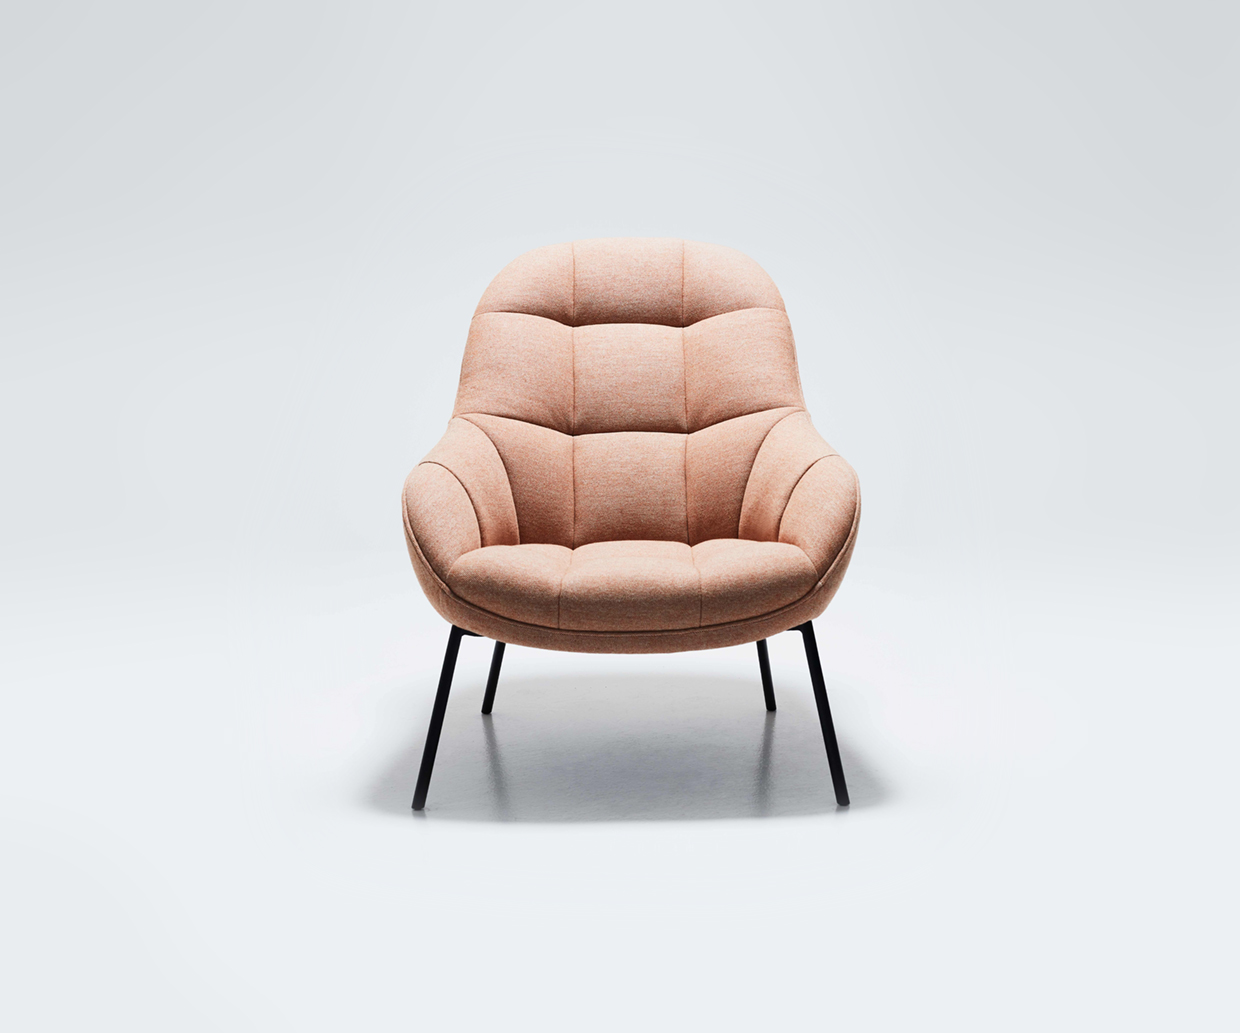 Mango Lounge Chair by Note Design Studio for WON